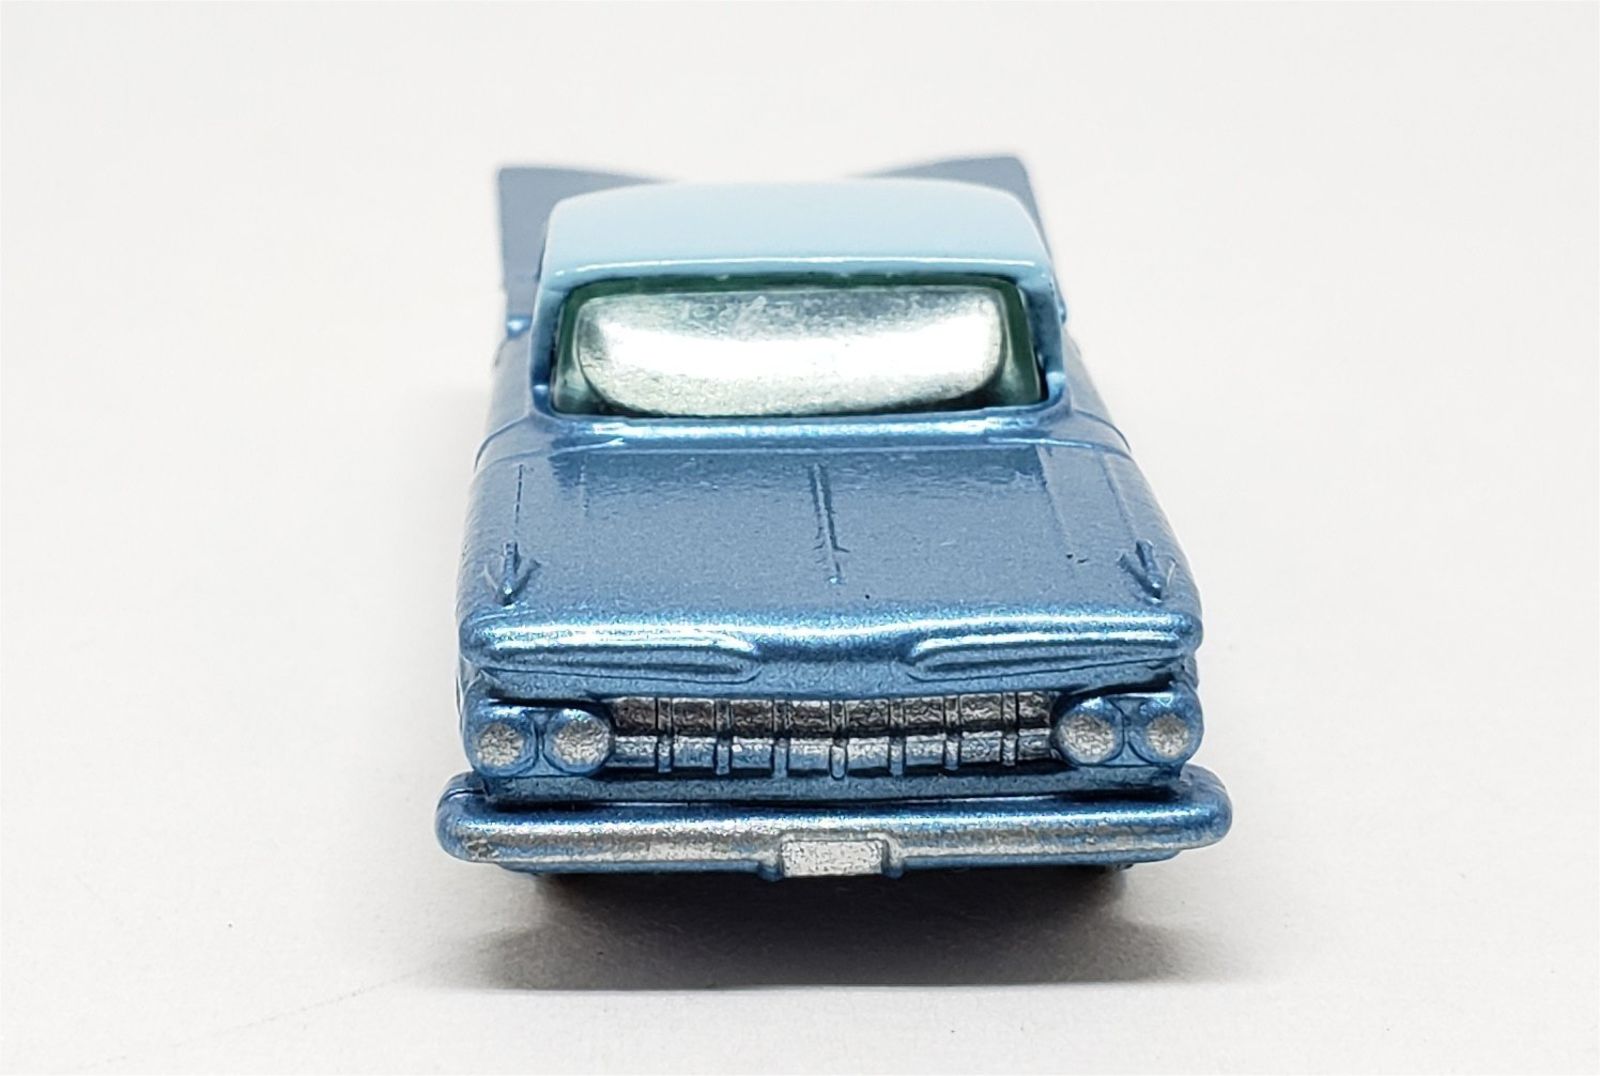 Illustration for article titled [REVIEW] Lesney Matchbox Chevrolet Impala